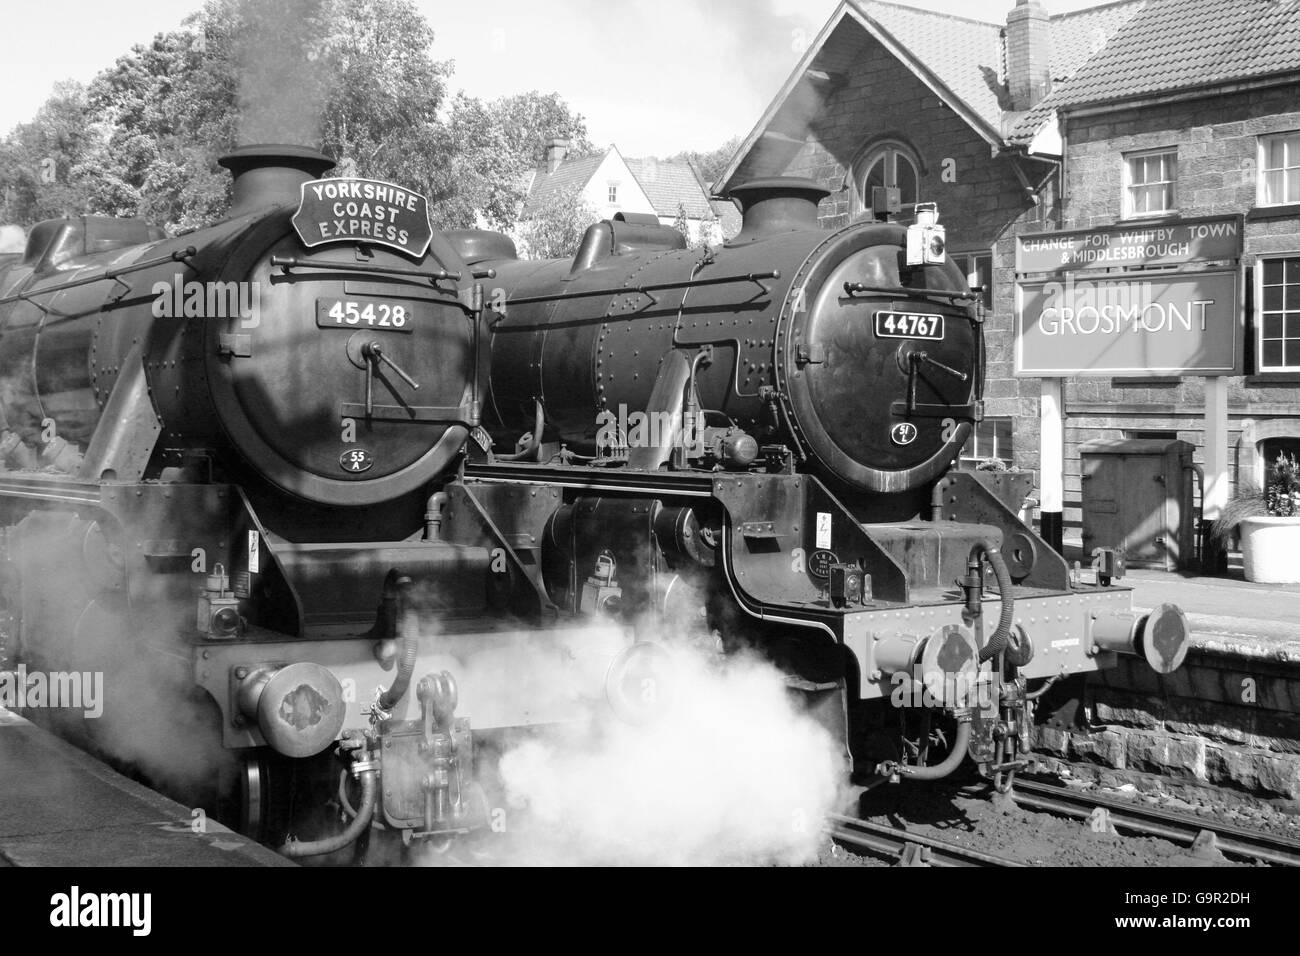 Black 5s 45428 and 44767 mark time at Grosmont with southbound departures Stock Photo